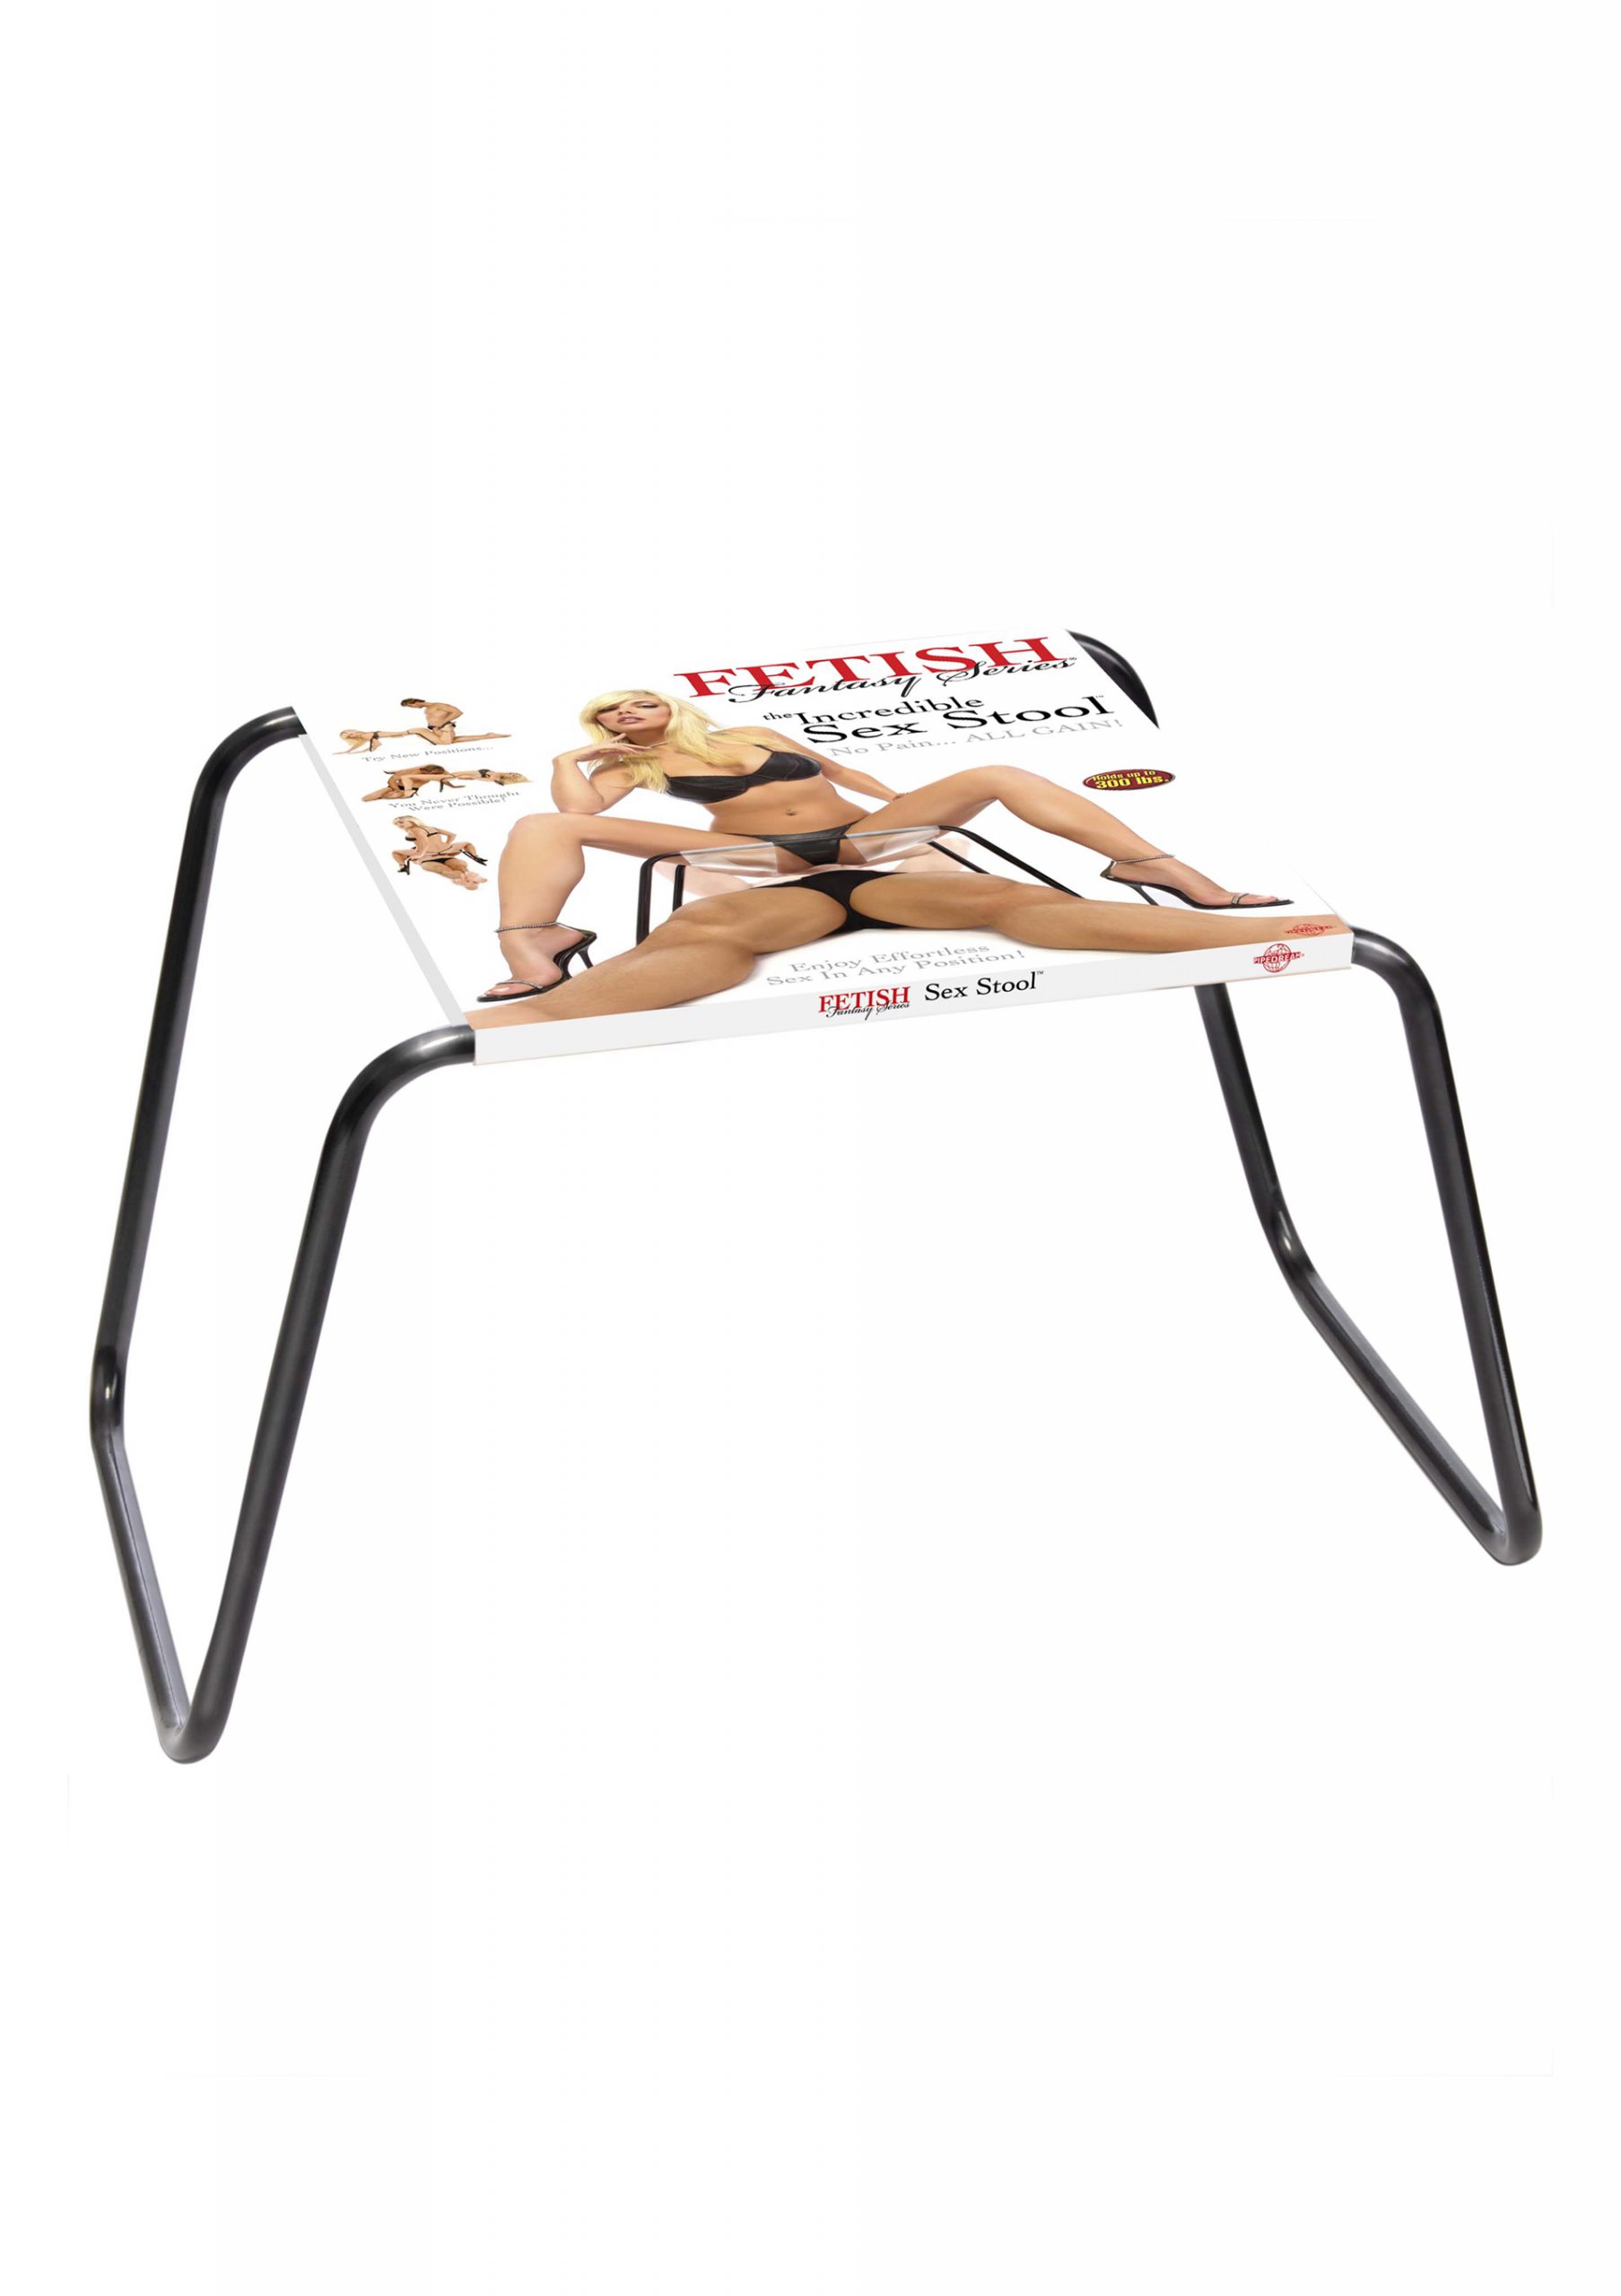 Секс стол The Incredible Sex Stool